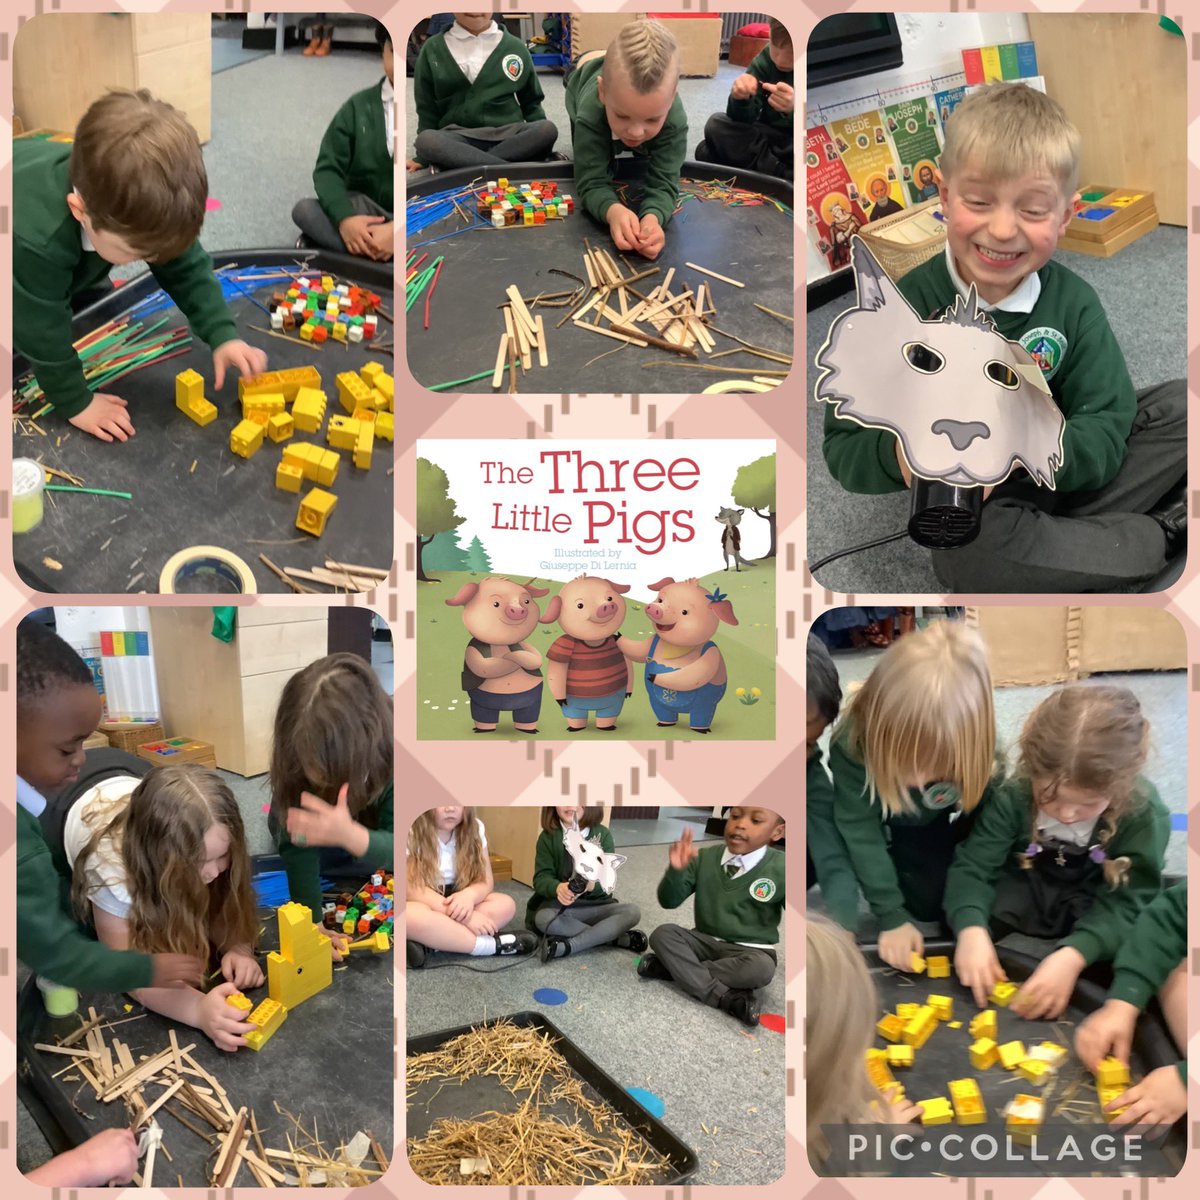 Reception have made their own houses from a variety of materials today, to make sure the big bad wolf doesn’t get the three little pigs! We found out that the bricks were the strongest and kept the pigs safe! @StJosephStBede #SJSBEnglish #SJSBEYFS #SJSBSTEM #UnderstandingTheWorld